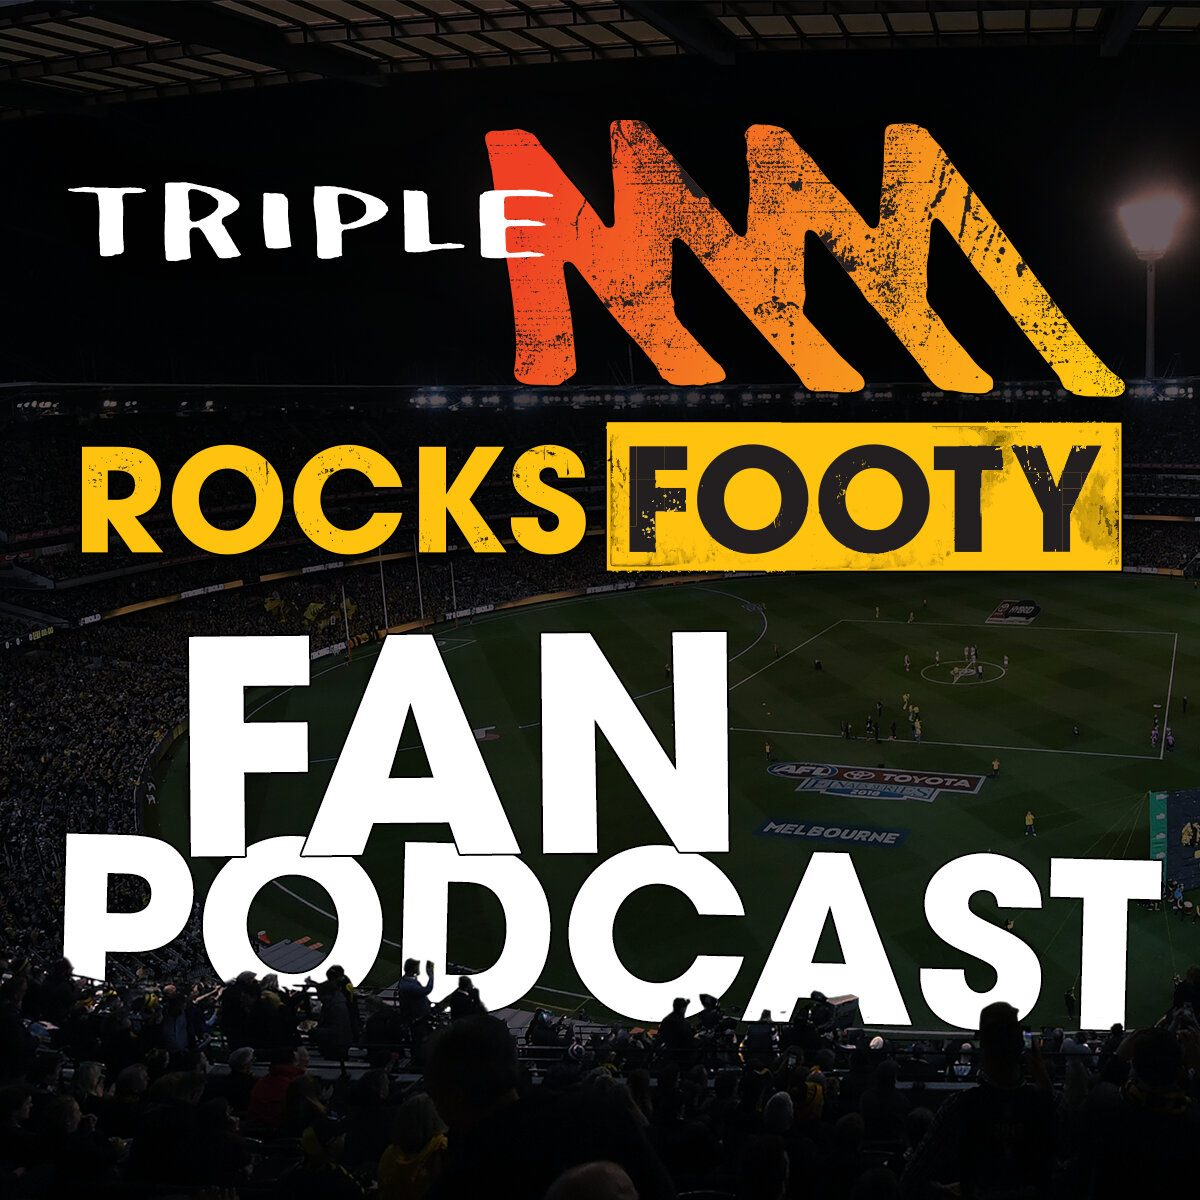 Footy Fan Podcast - Which players look like the clubs they play for?